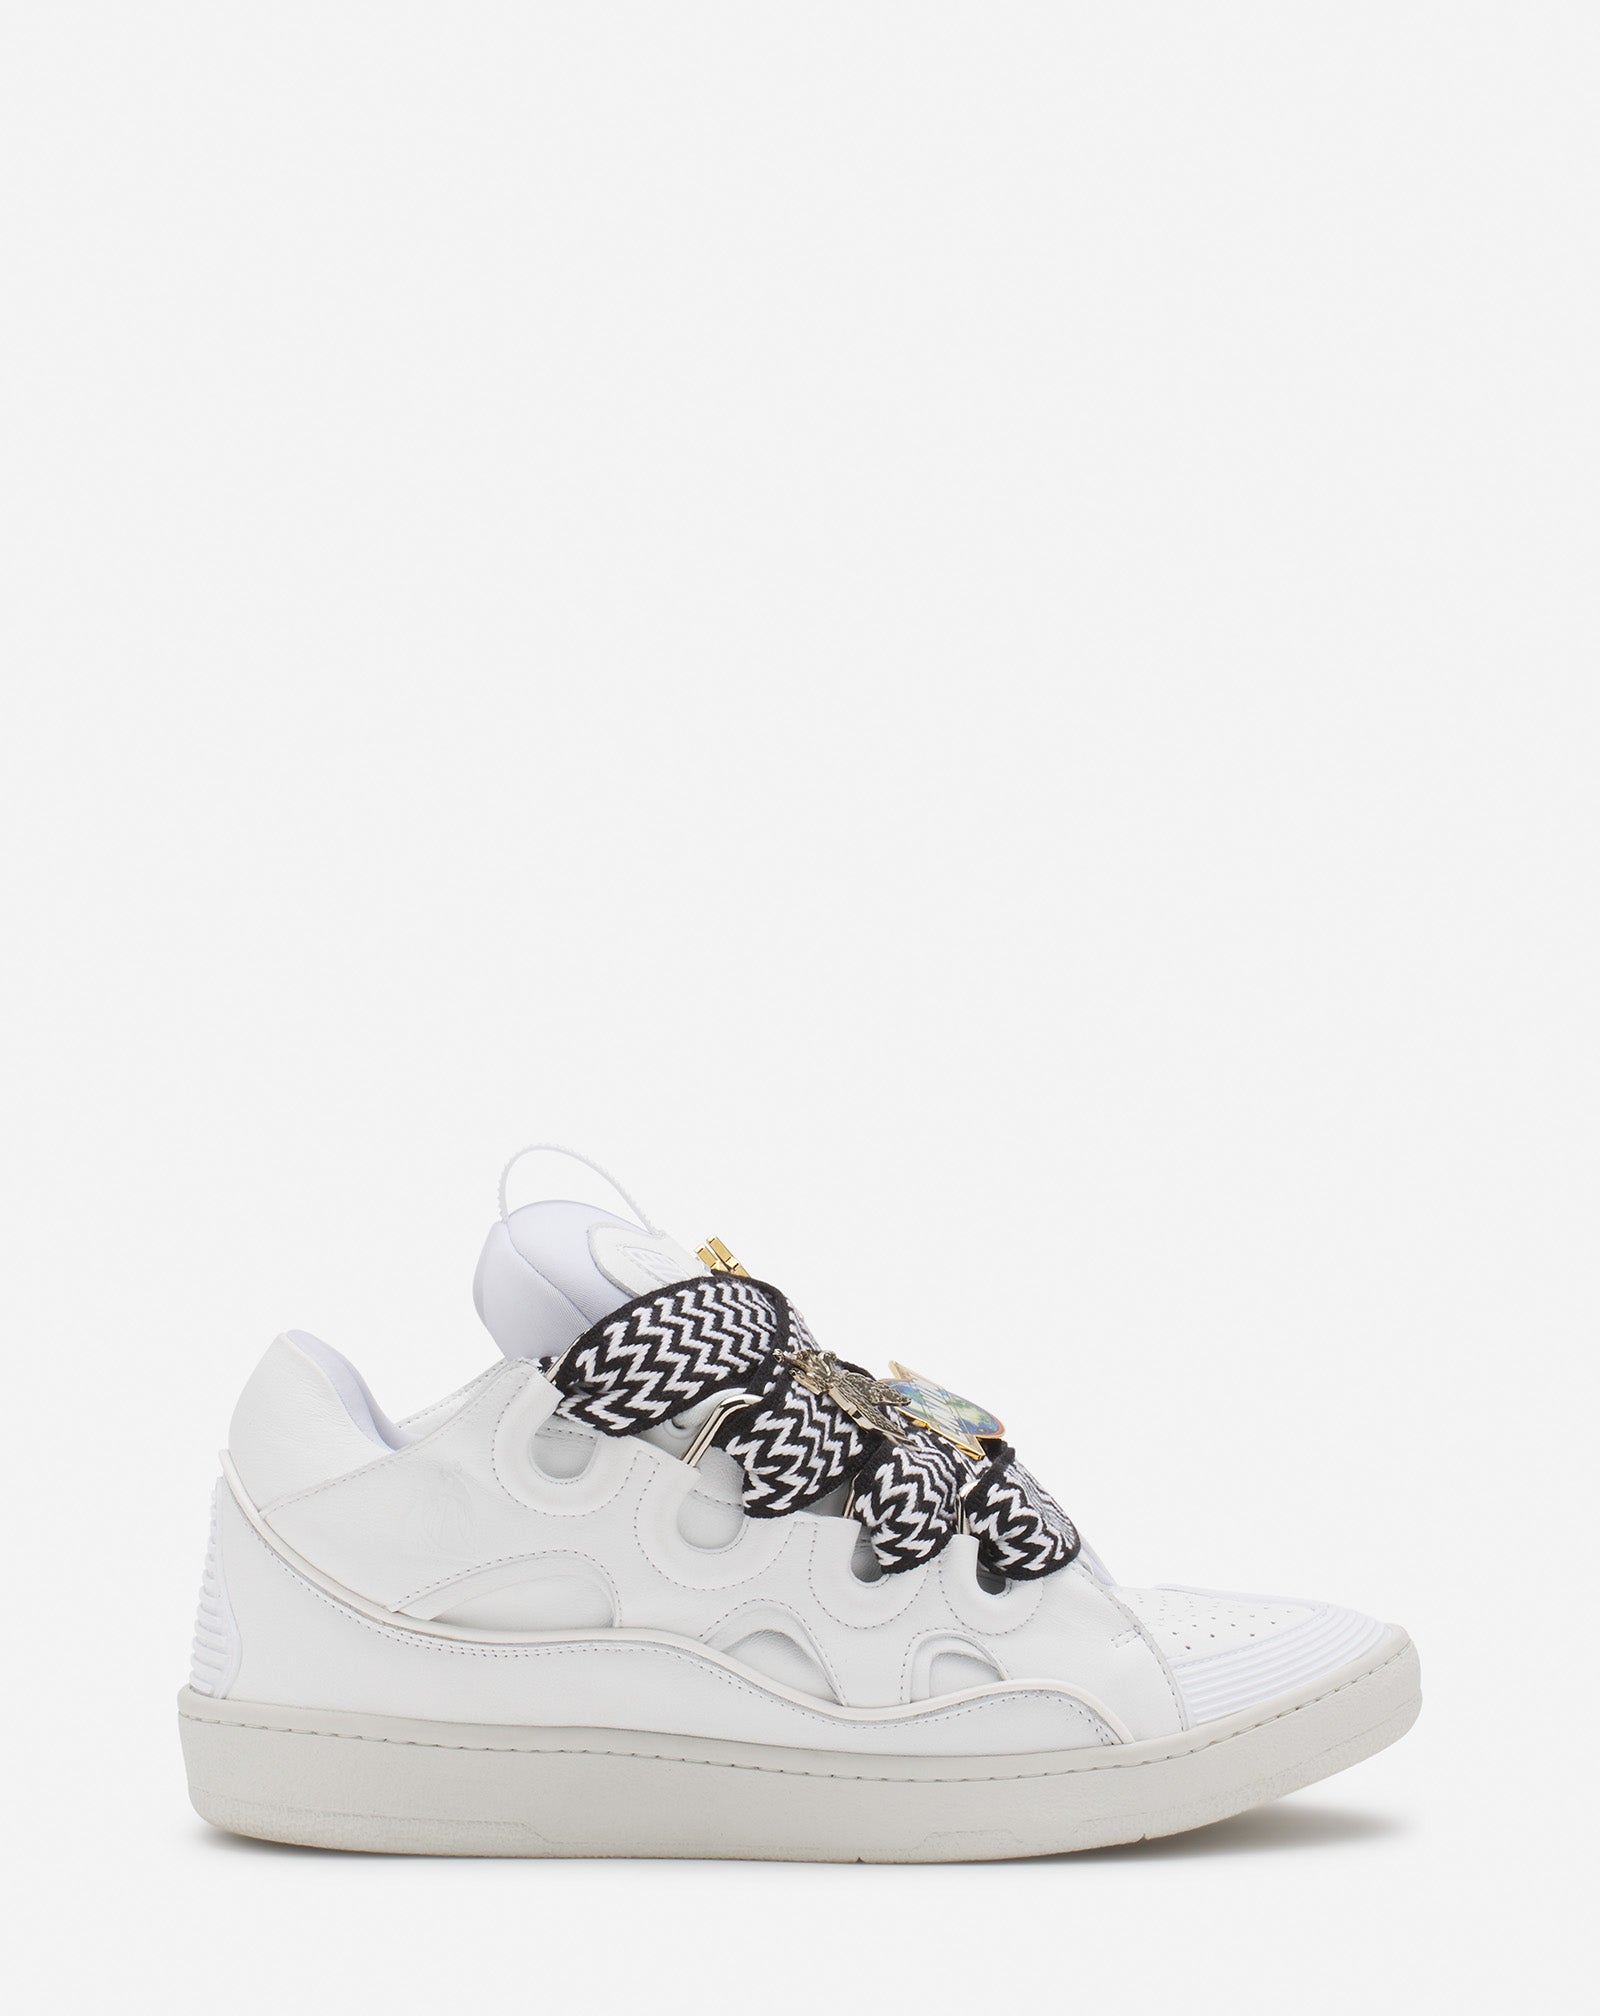 Lanvin high-top sneakers - White